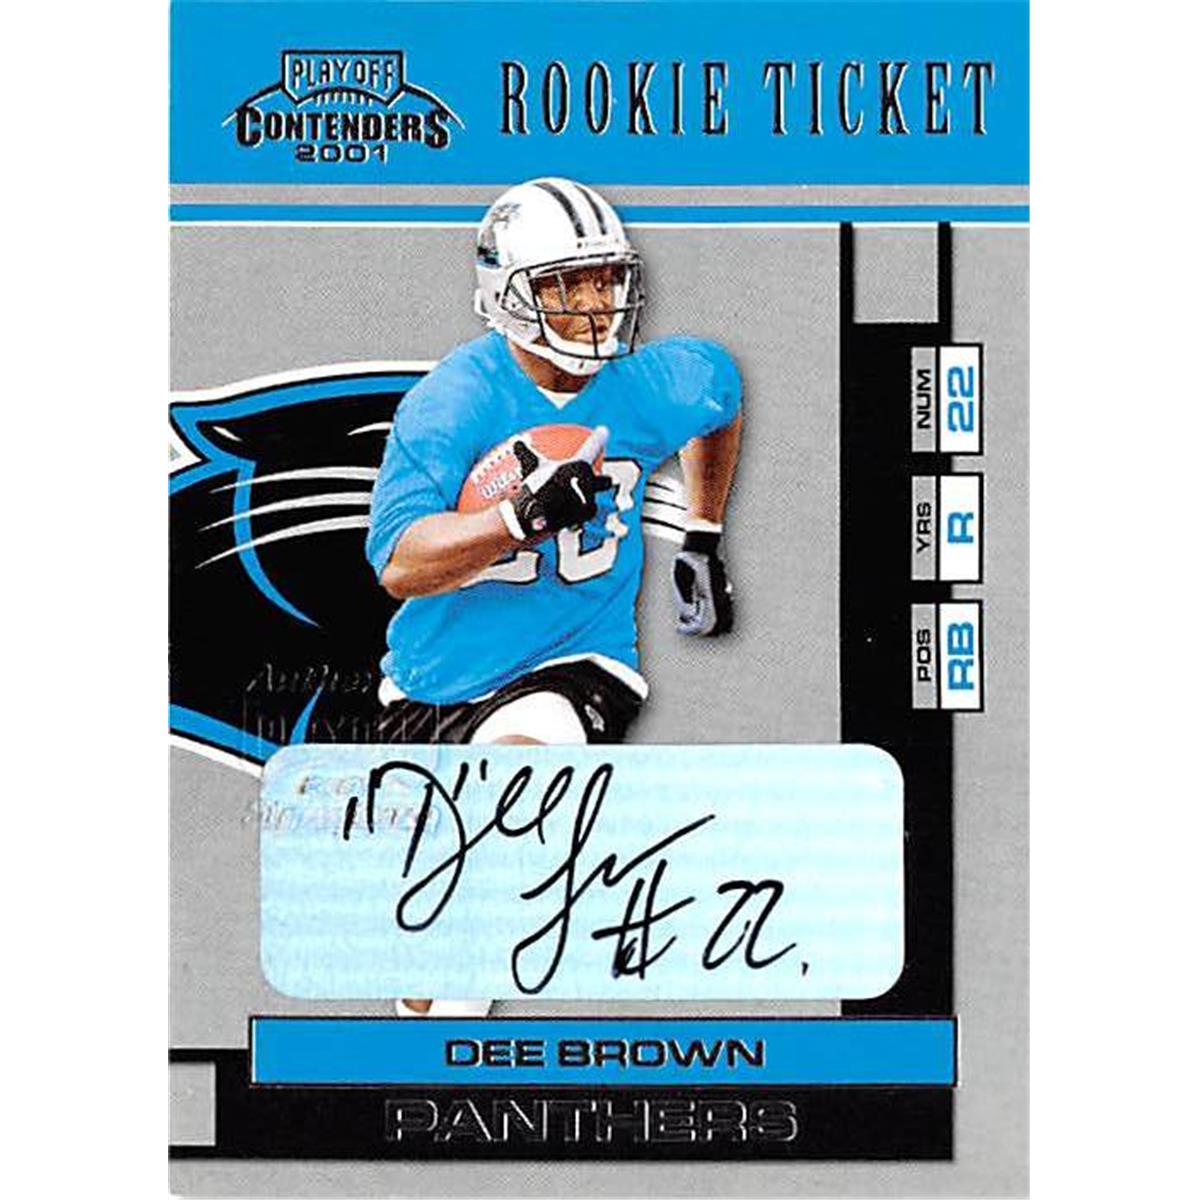 Picture of Autograph Warehouse 366578 Dee Brown Autographed Football Card - 2001 Playoff Contenders Rookie Ticket 192